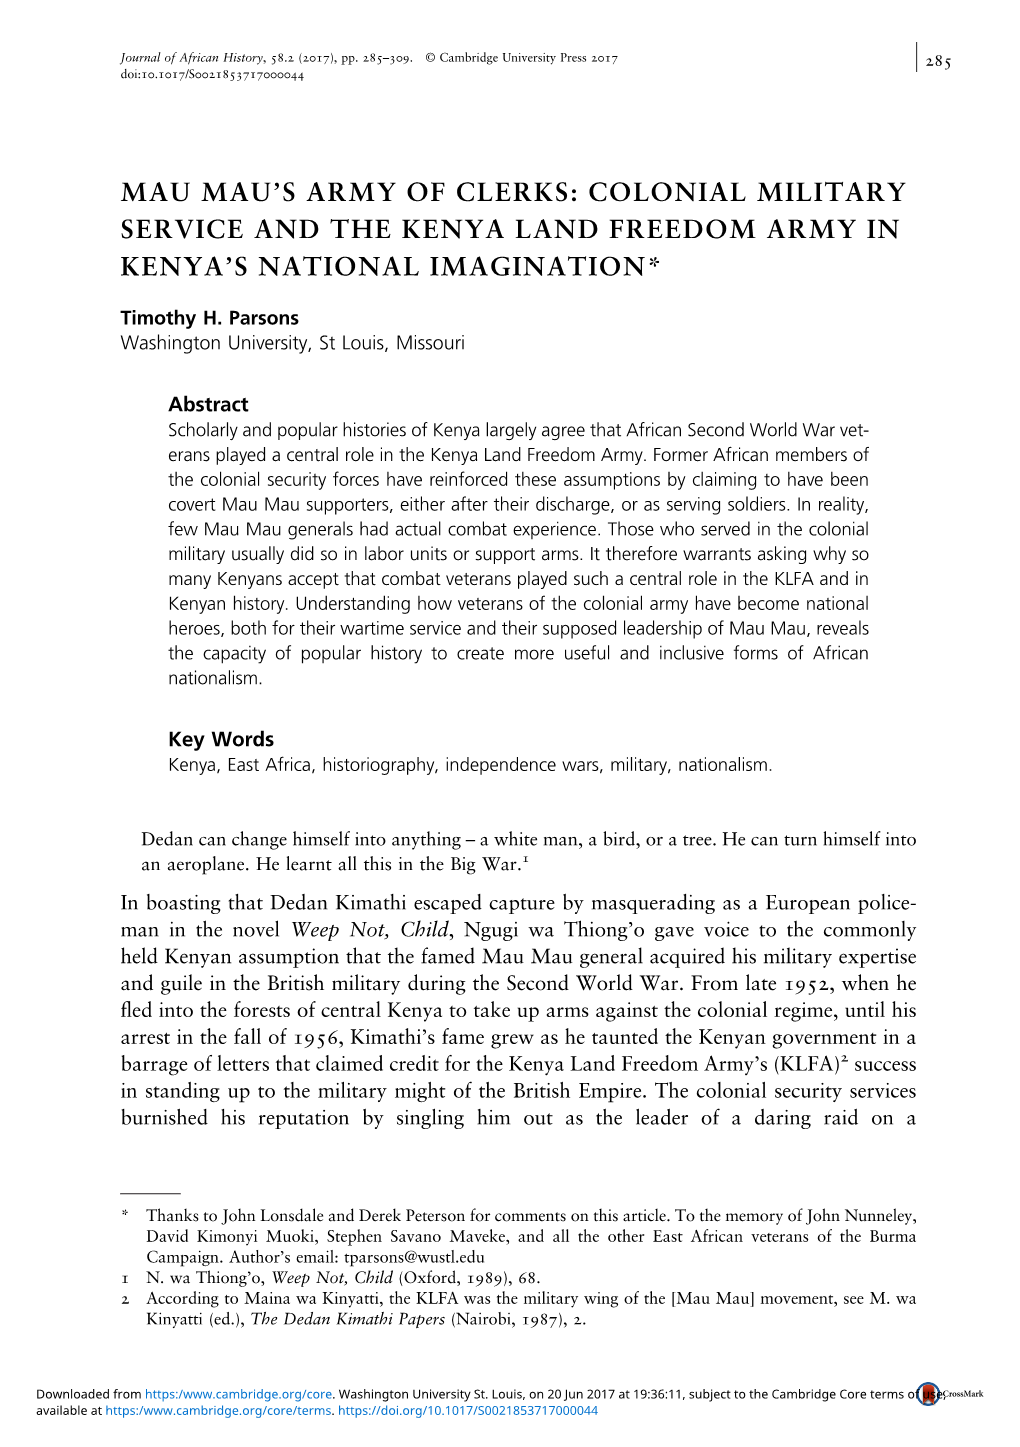 Mau Mau's Army of Clerks: Colonial Military Service and the Kenya Land Freedom Army in Kenya's National Imagination